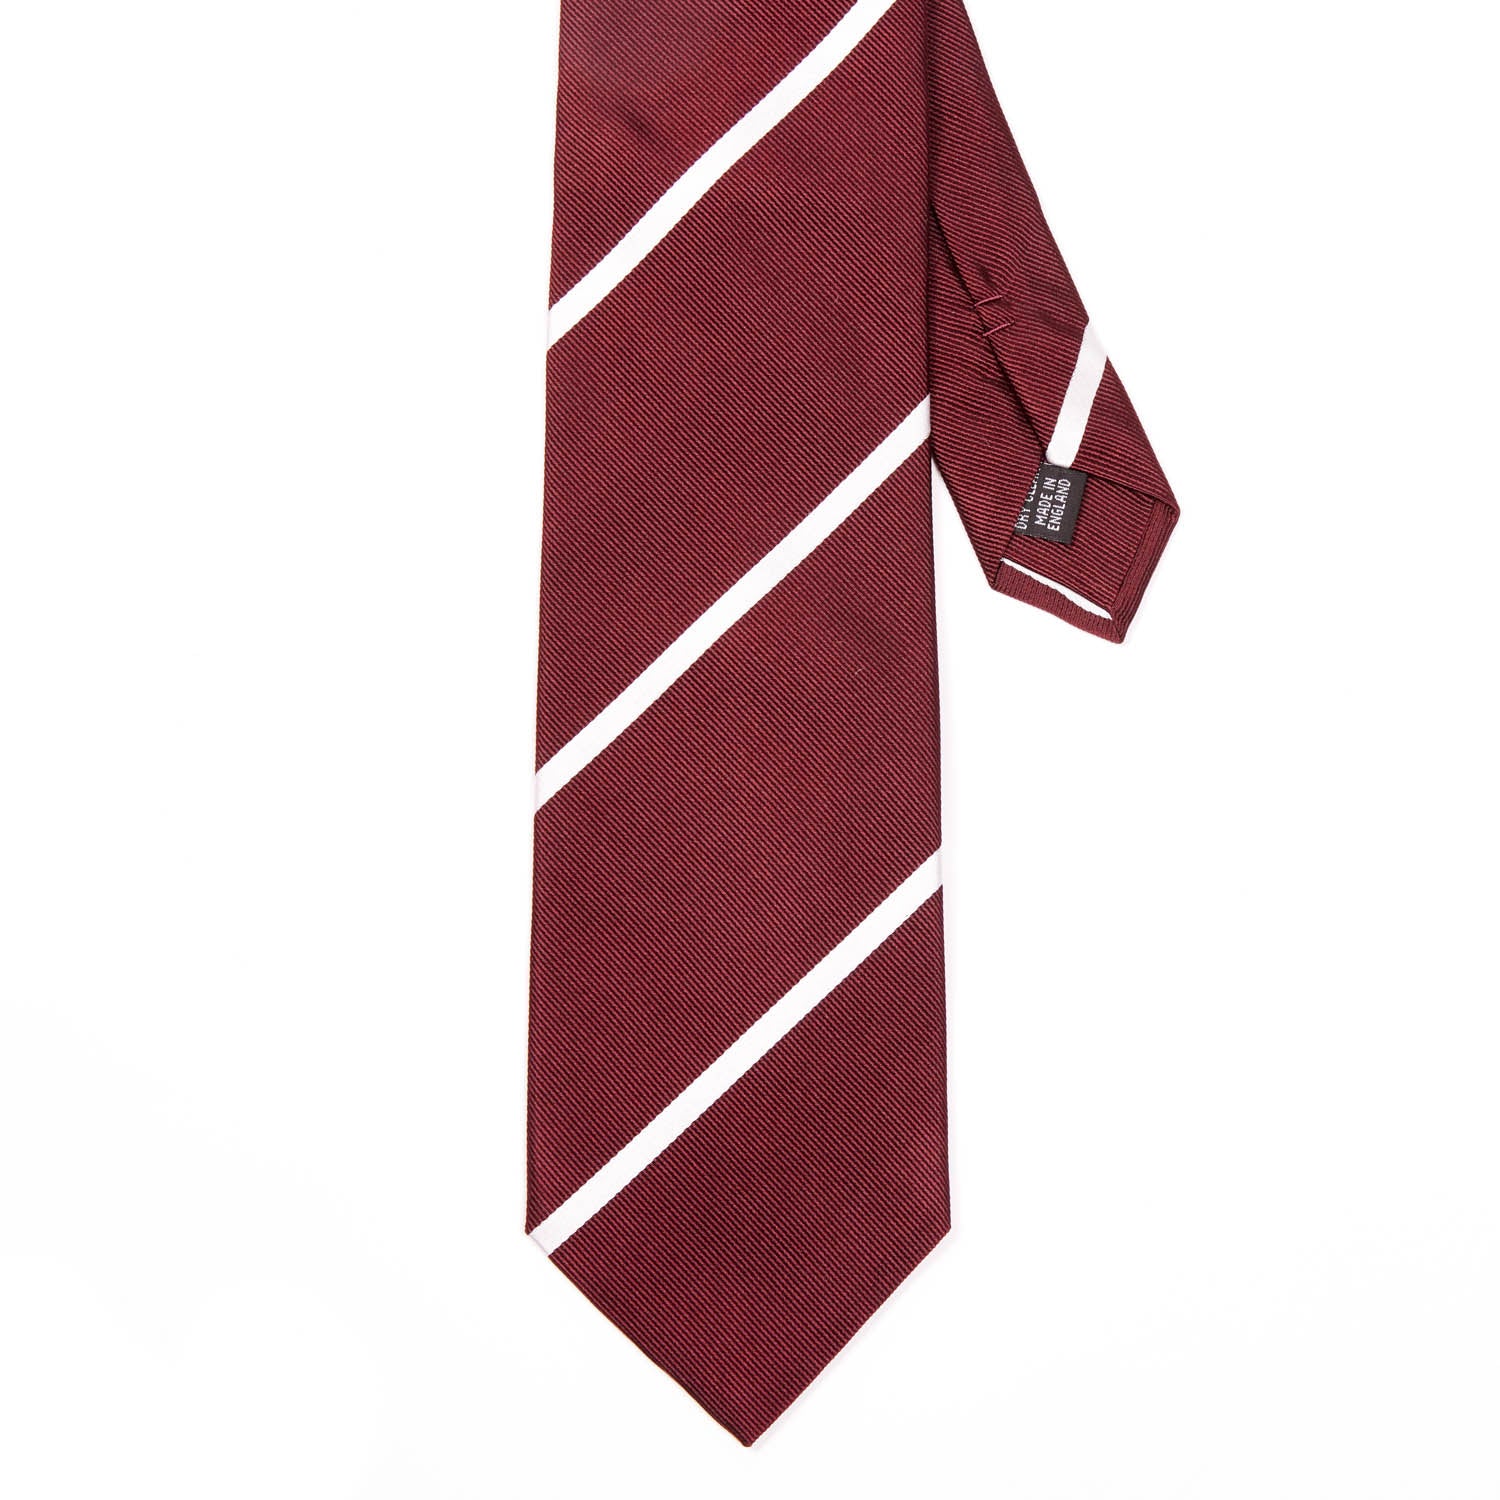 A burgundy and white striped Sovereign Grade Oxblood Narrow Rep tie from KirbyAllison.com, with premium linings, handmade in the United Kingdom, on a white background.